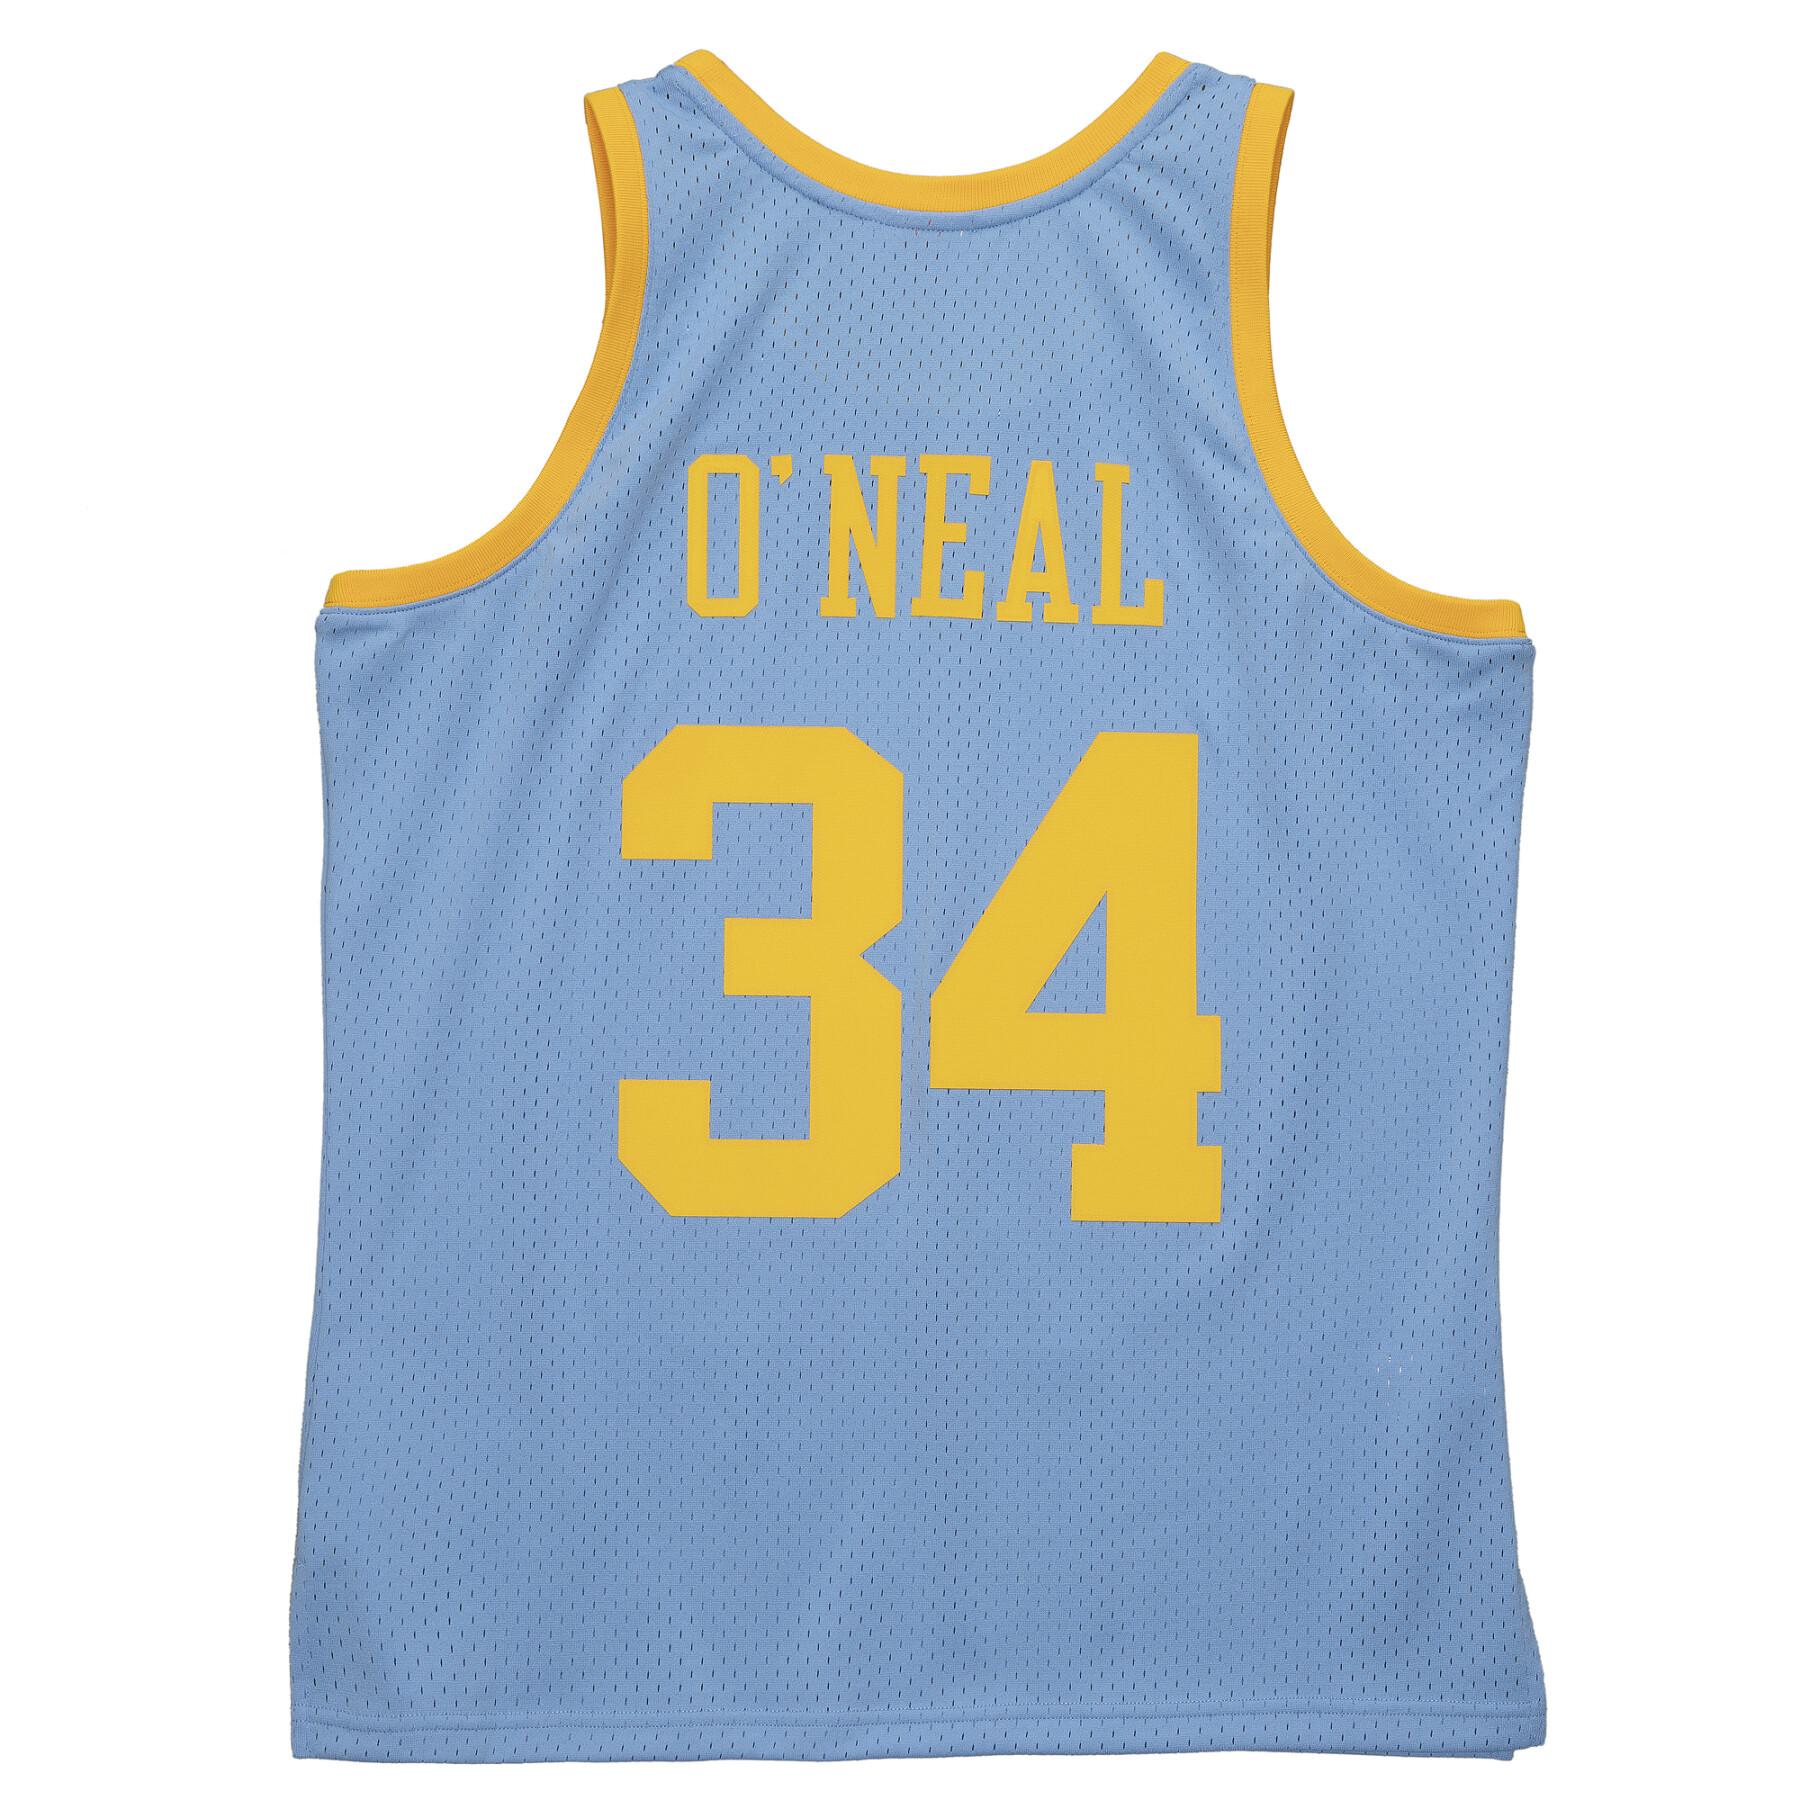 Camisola dos Lakers swingman shaquille o'neal 2001/02